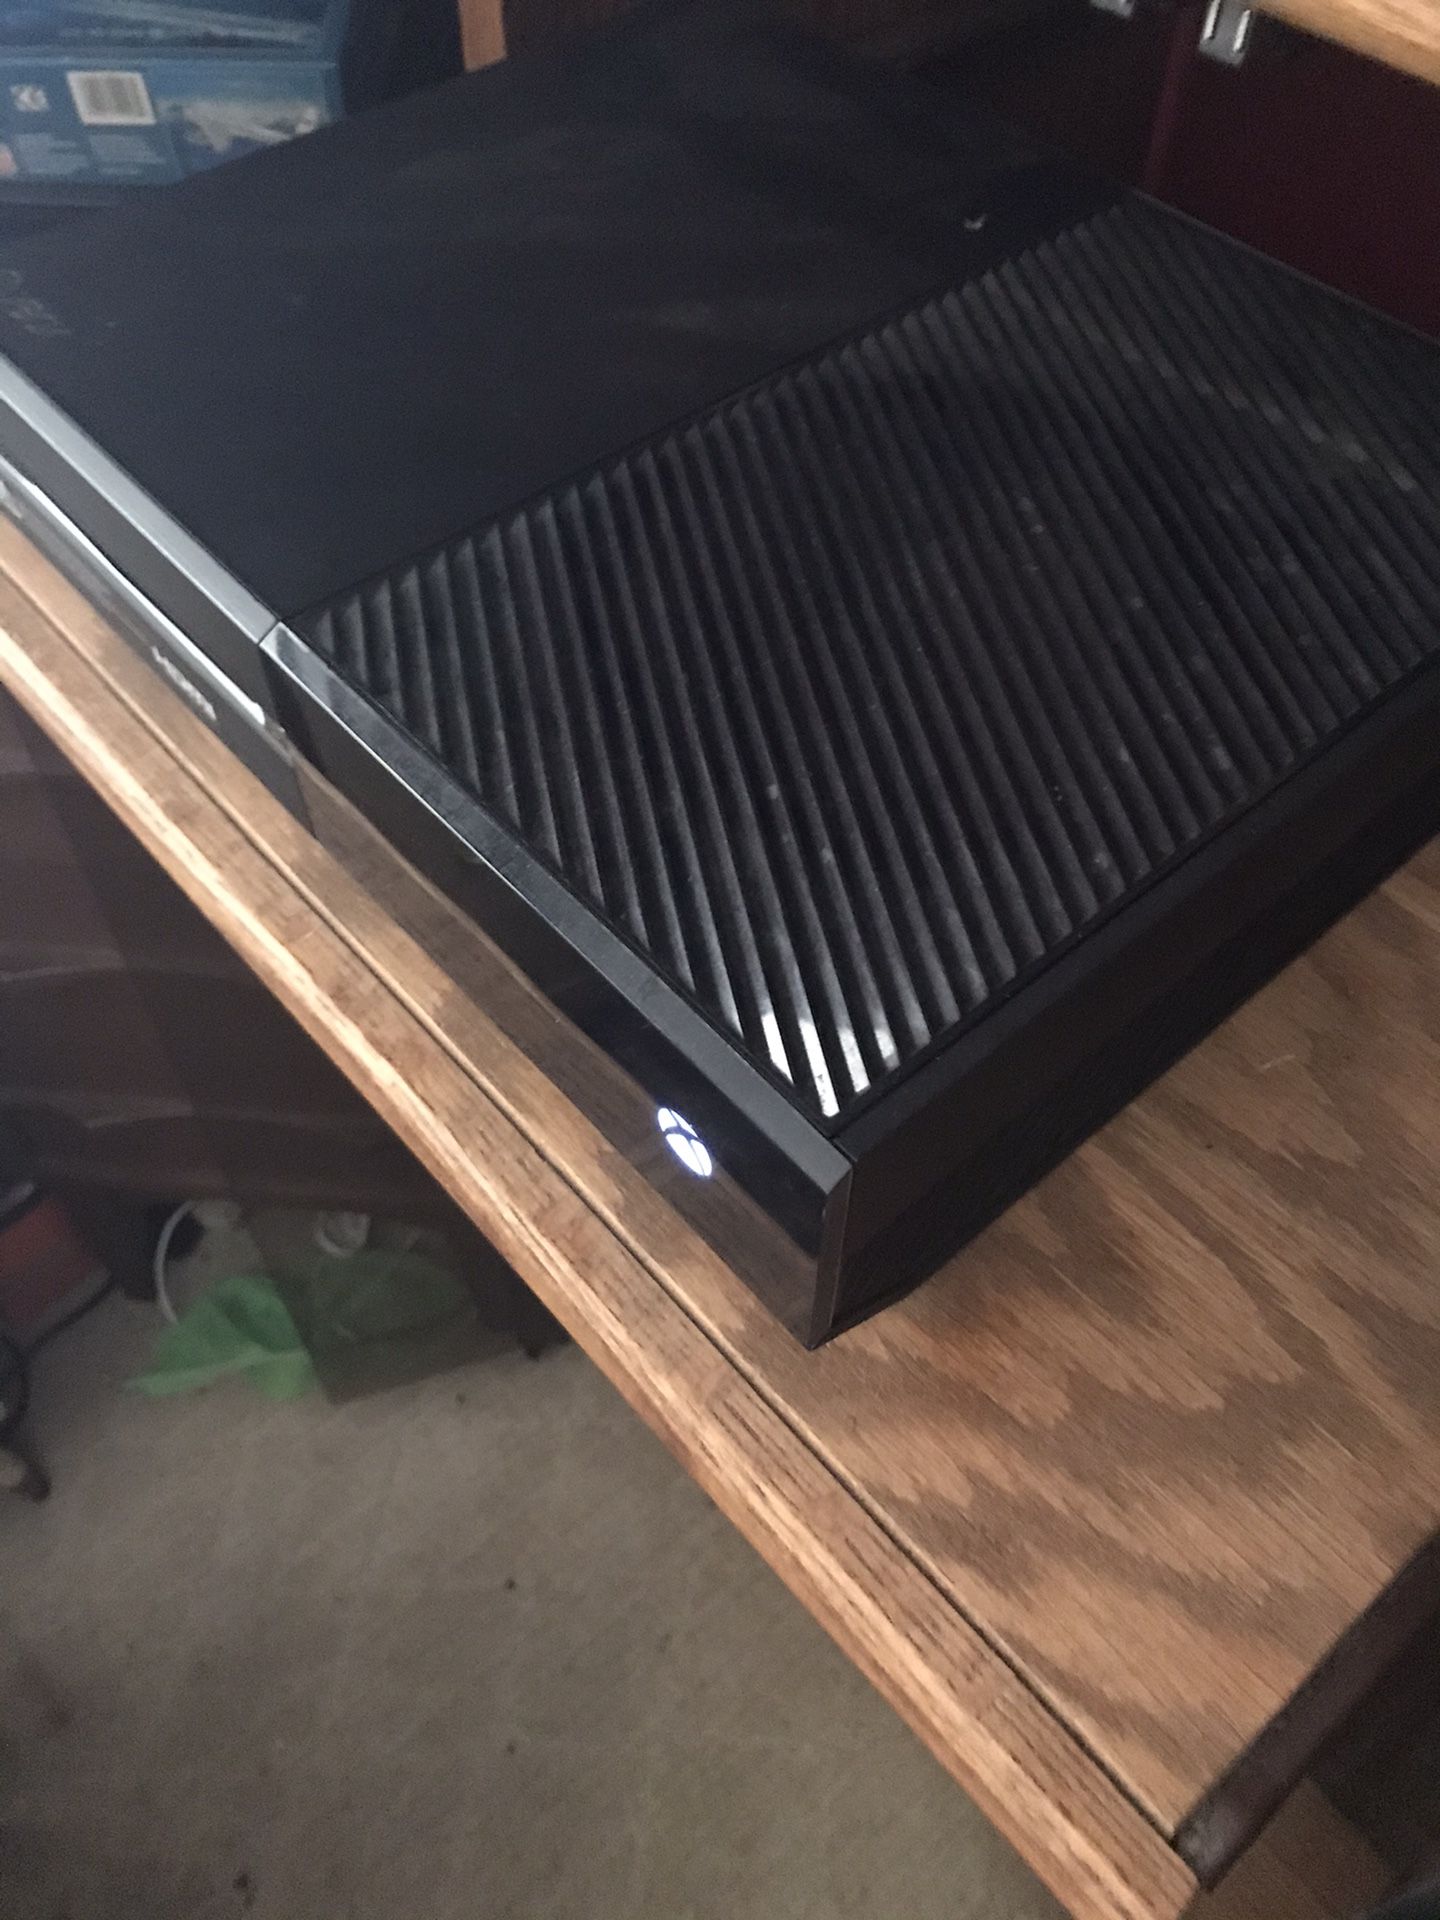 EXCELLENT XBOX ONE IN GREAT CONDITION